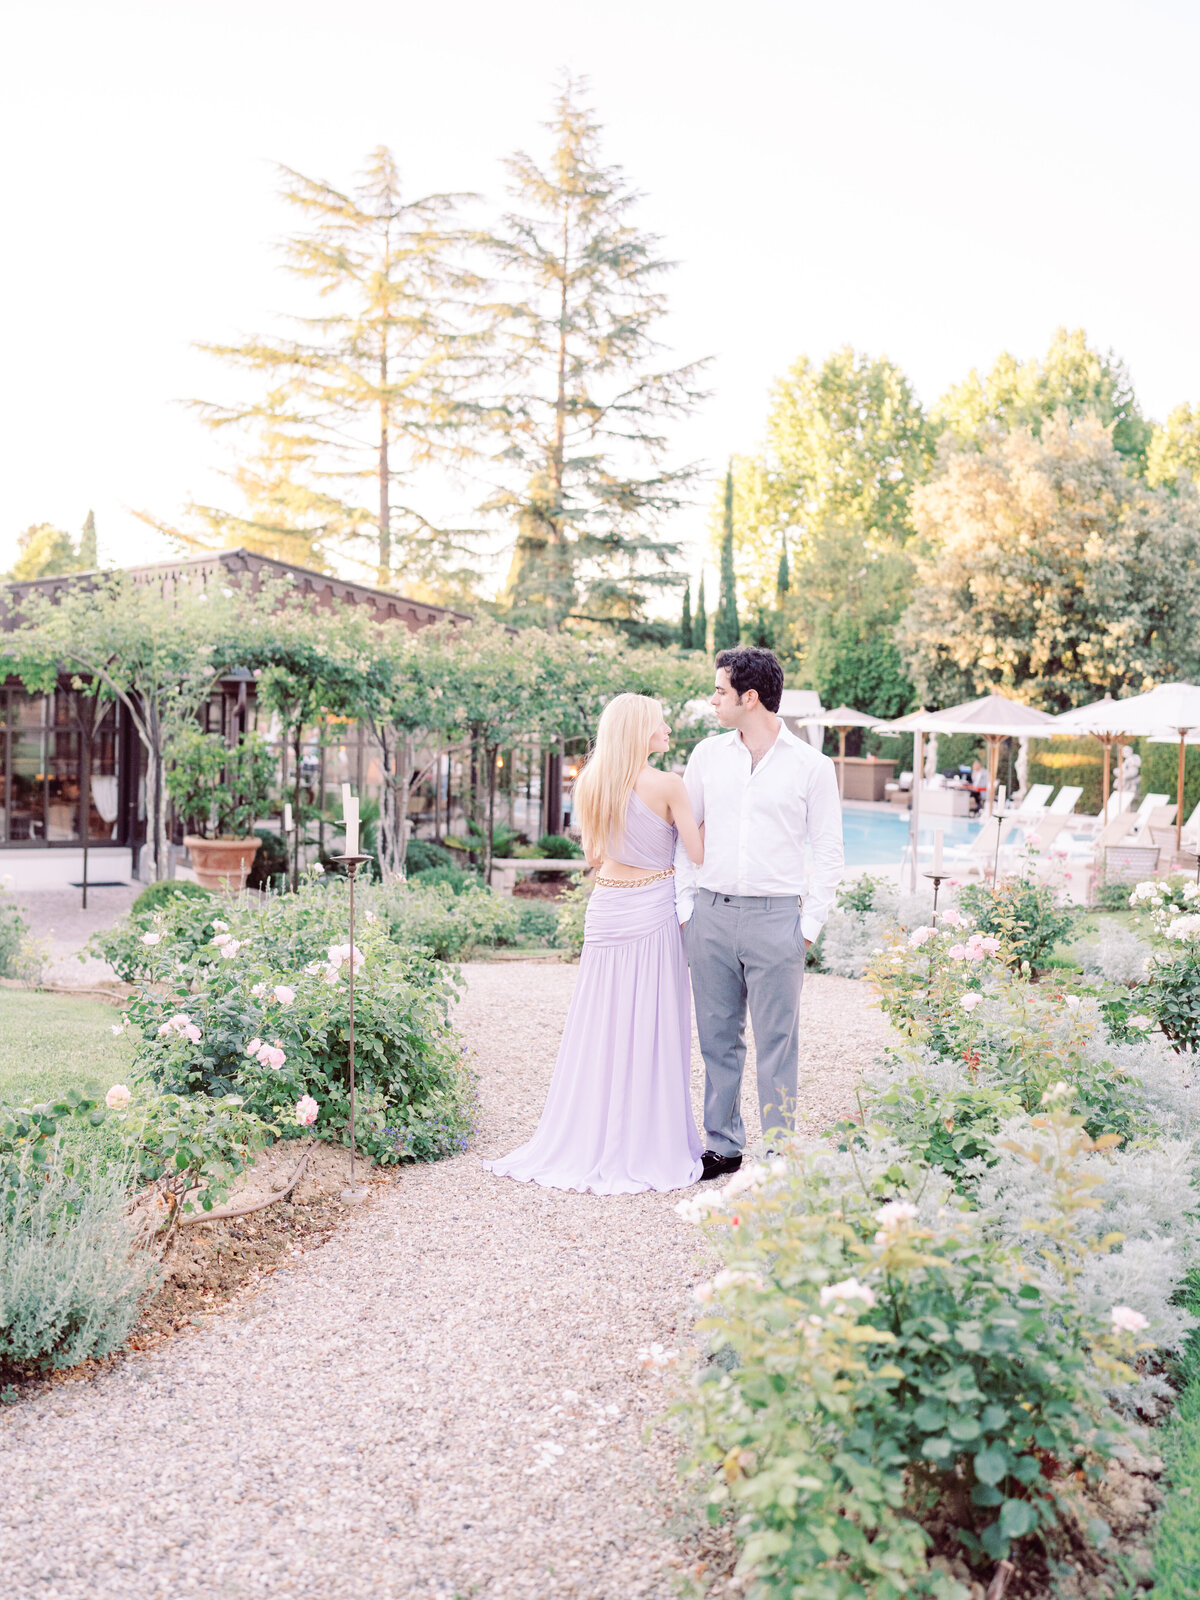 Honeymoon session in Florence Italy at Villa Cora photographed by Tuscany wedding photographer.